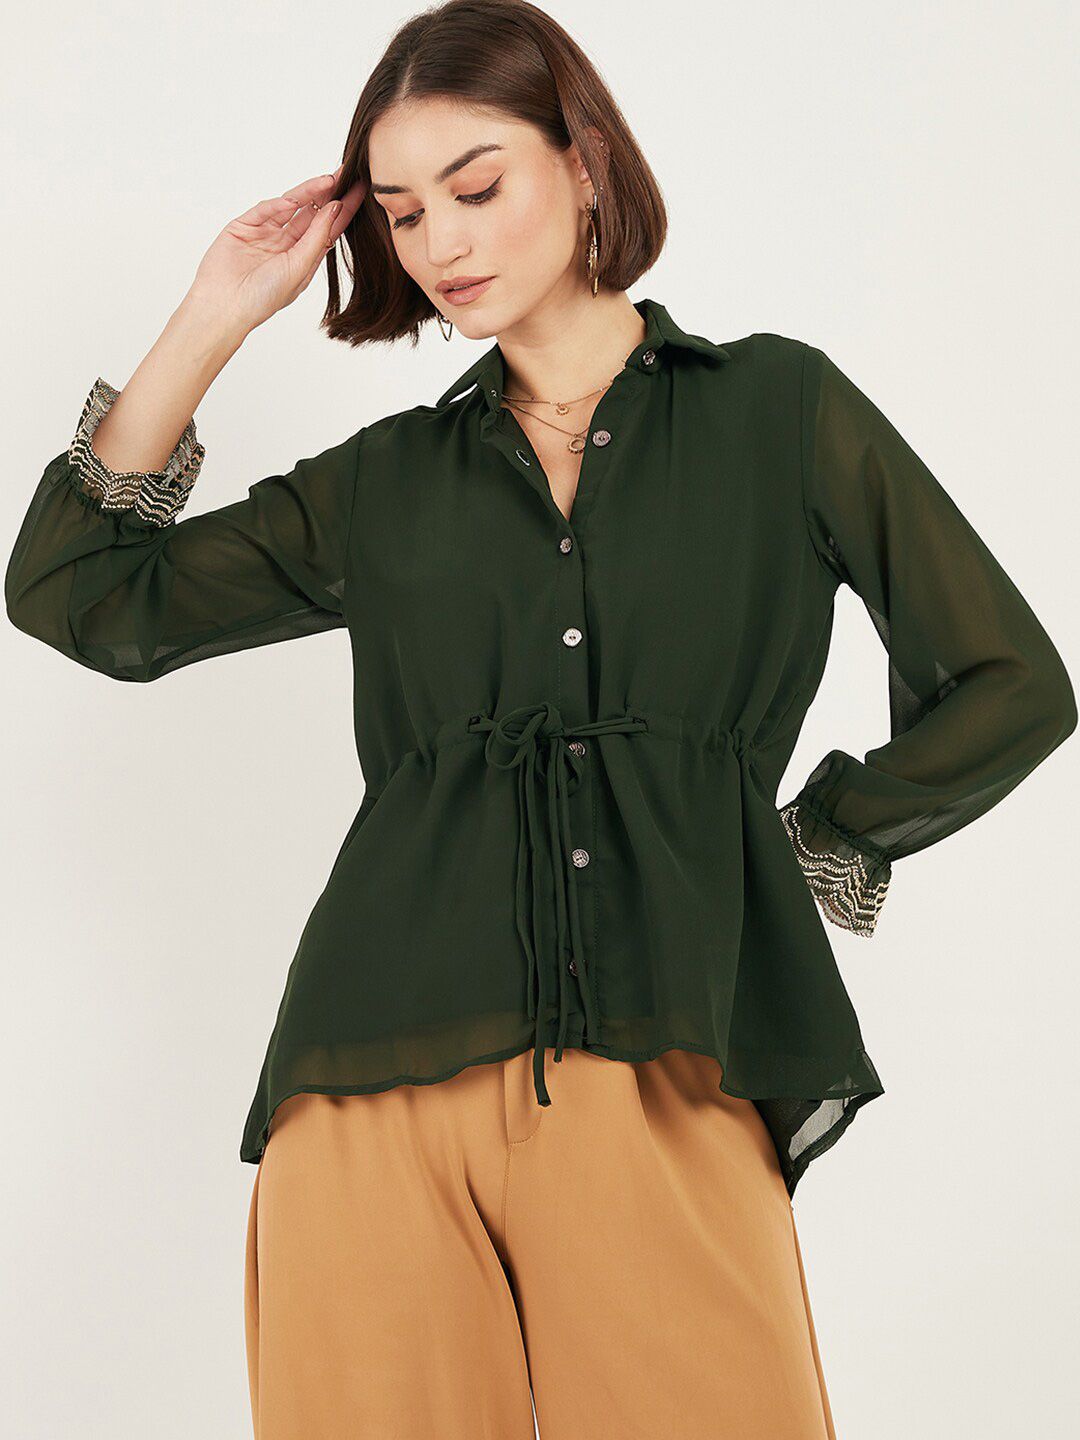 DressBerry Olive Green Mandarin Collar Georgette Shirt Style Top Price in India